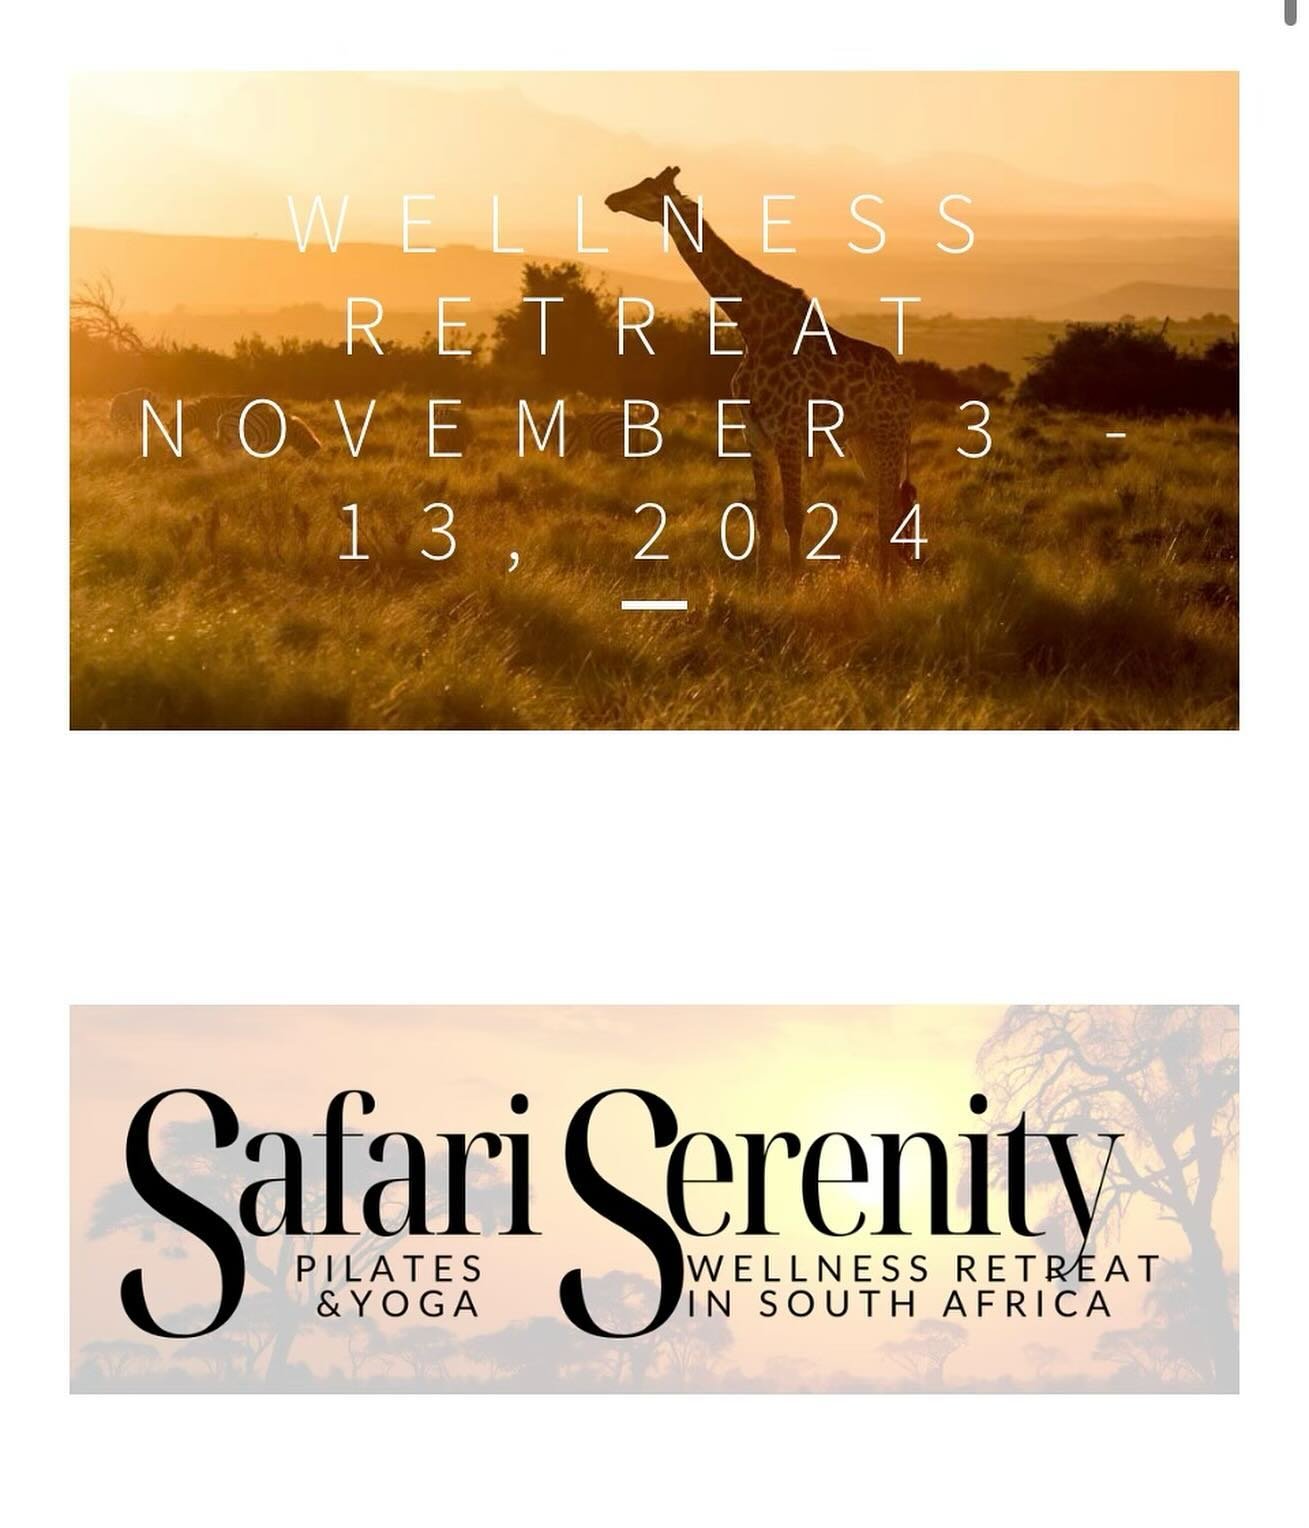 Bulates is so excited to be offering our first retreat in Cape Town, South Africa ! This has been a dream for me to share my beautiful home country! The one and only @niedragabriel and myself will be hosting this spectacular experience! Please check 